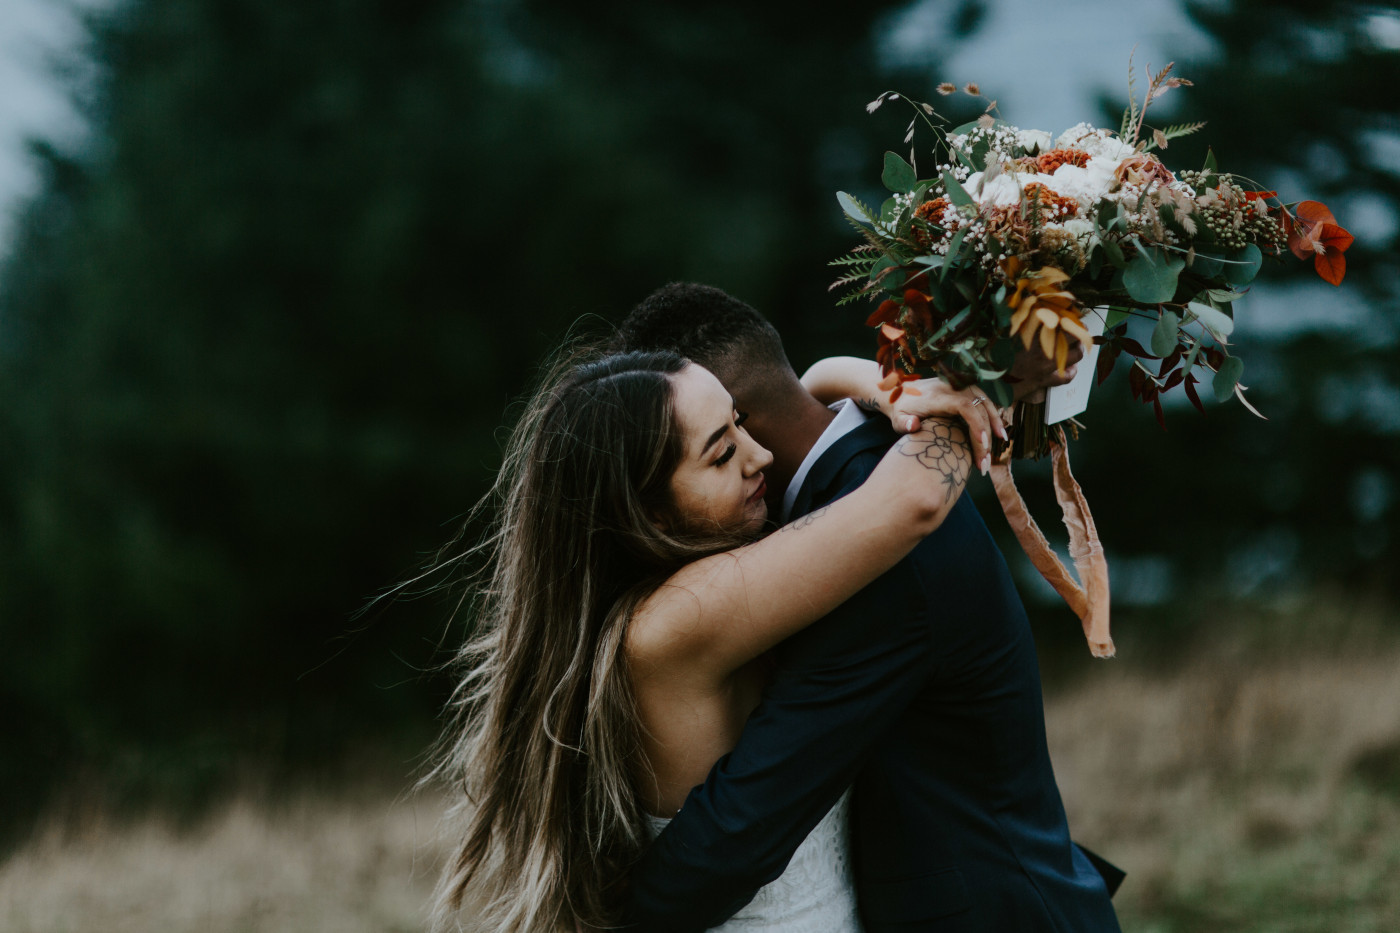 Deandre and Ariana hugging. Elopement photography at Mount Hood by Sienna Plus Josh.